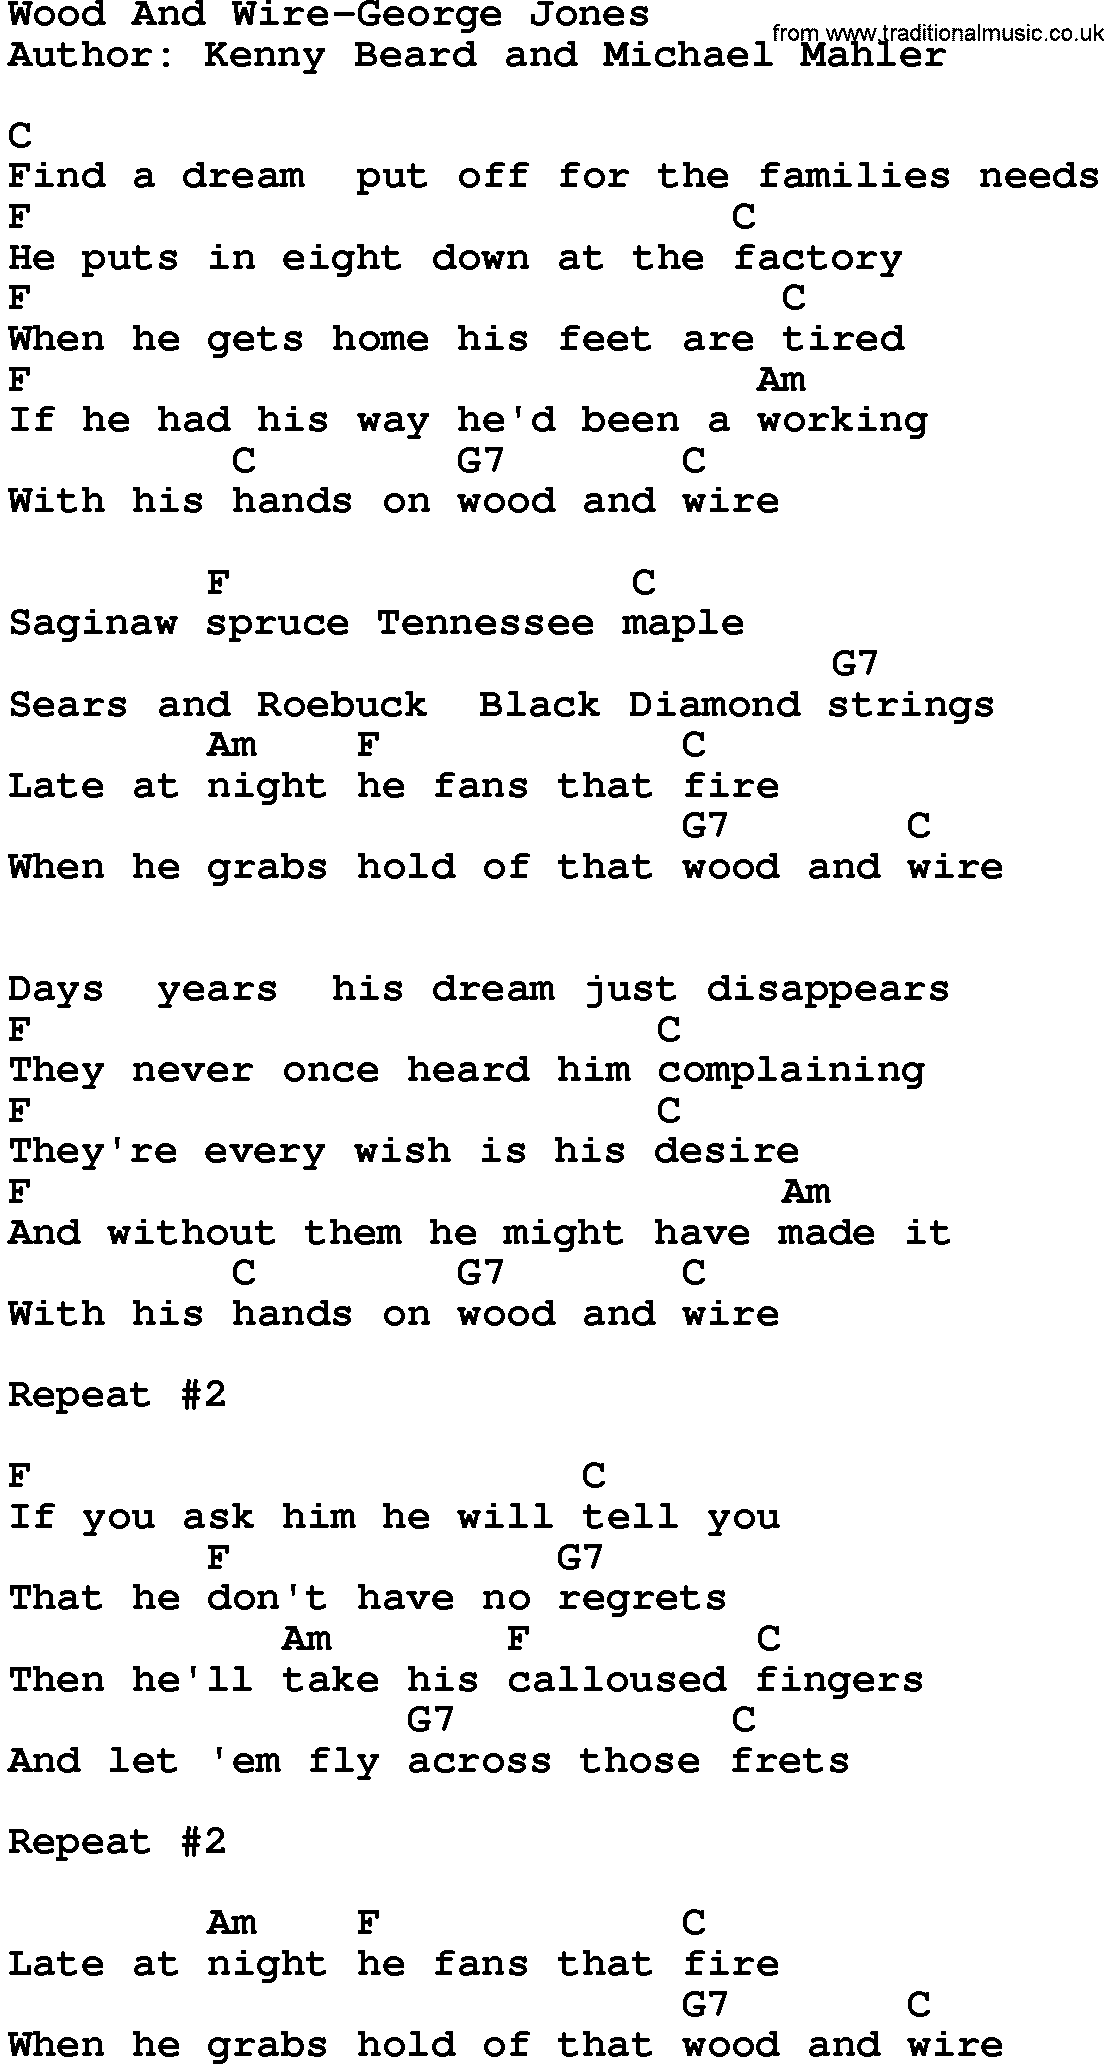 Country music song: Wood And Wire-George Jones lyrics and chords